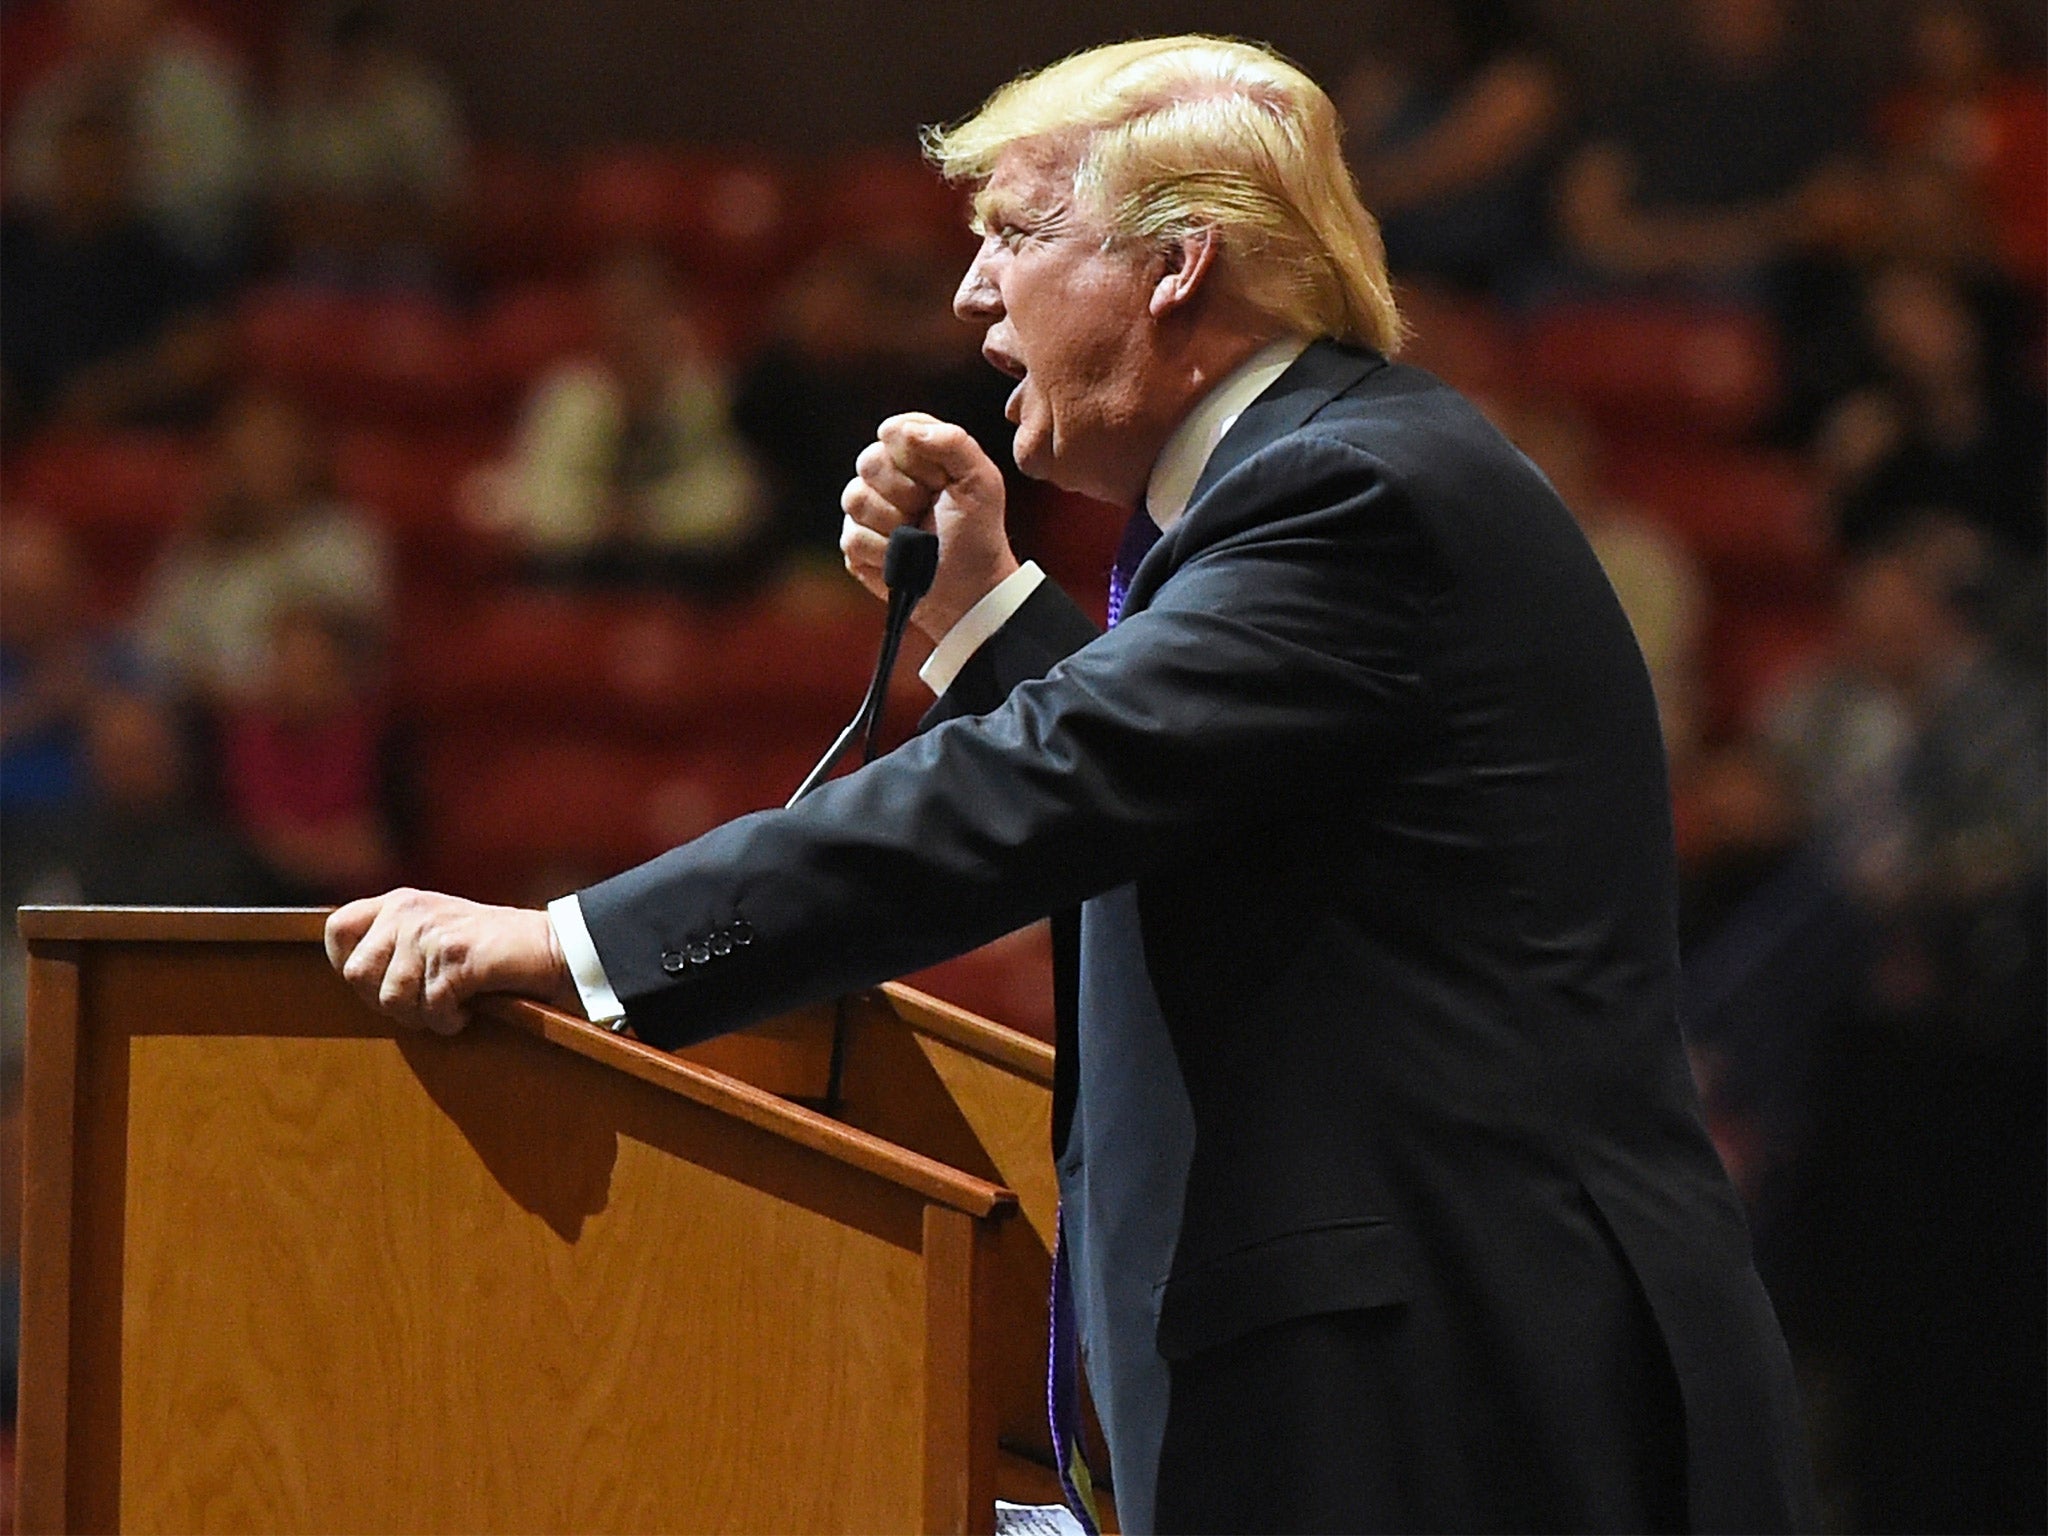 Republican presidential candidate Donald Trump speaks at a rally in Las Vegas